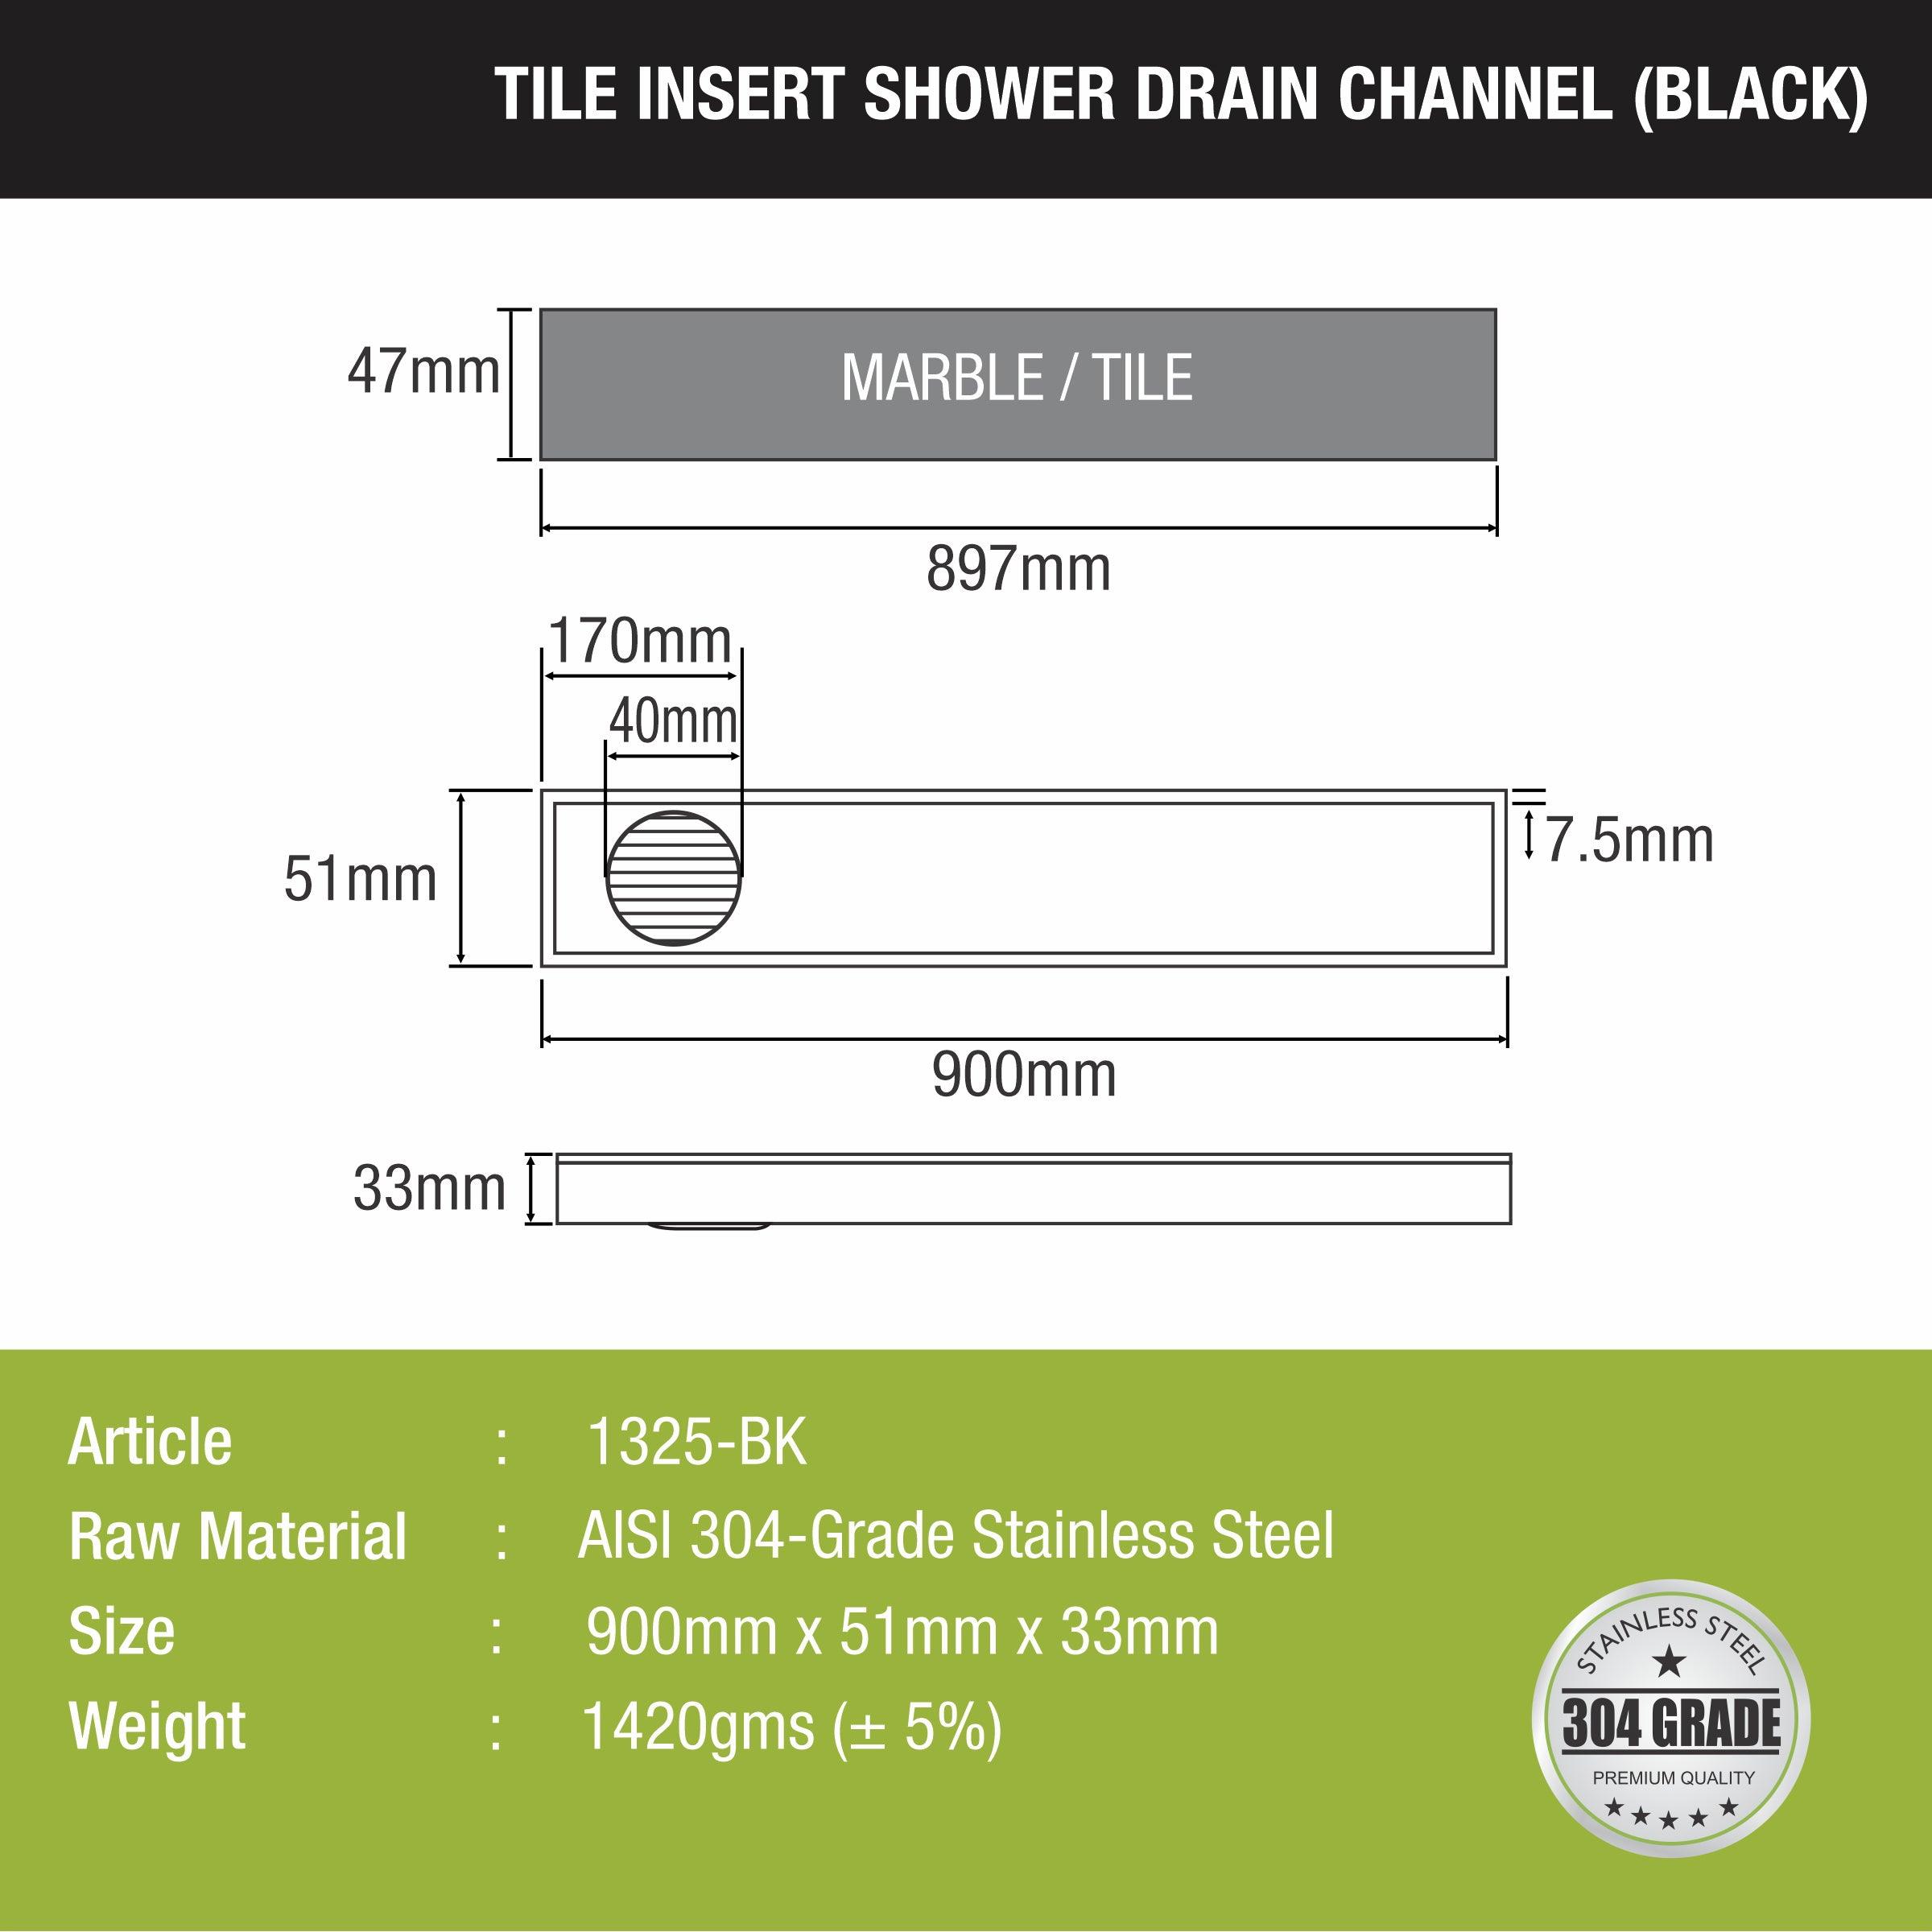 Tile Insert Shower Drain Channel - Black (36 x 2 Inches) size and measurent